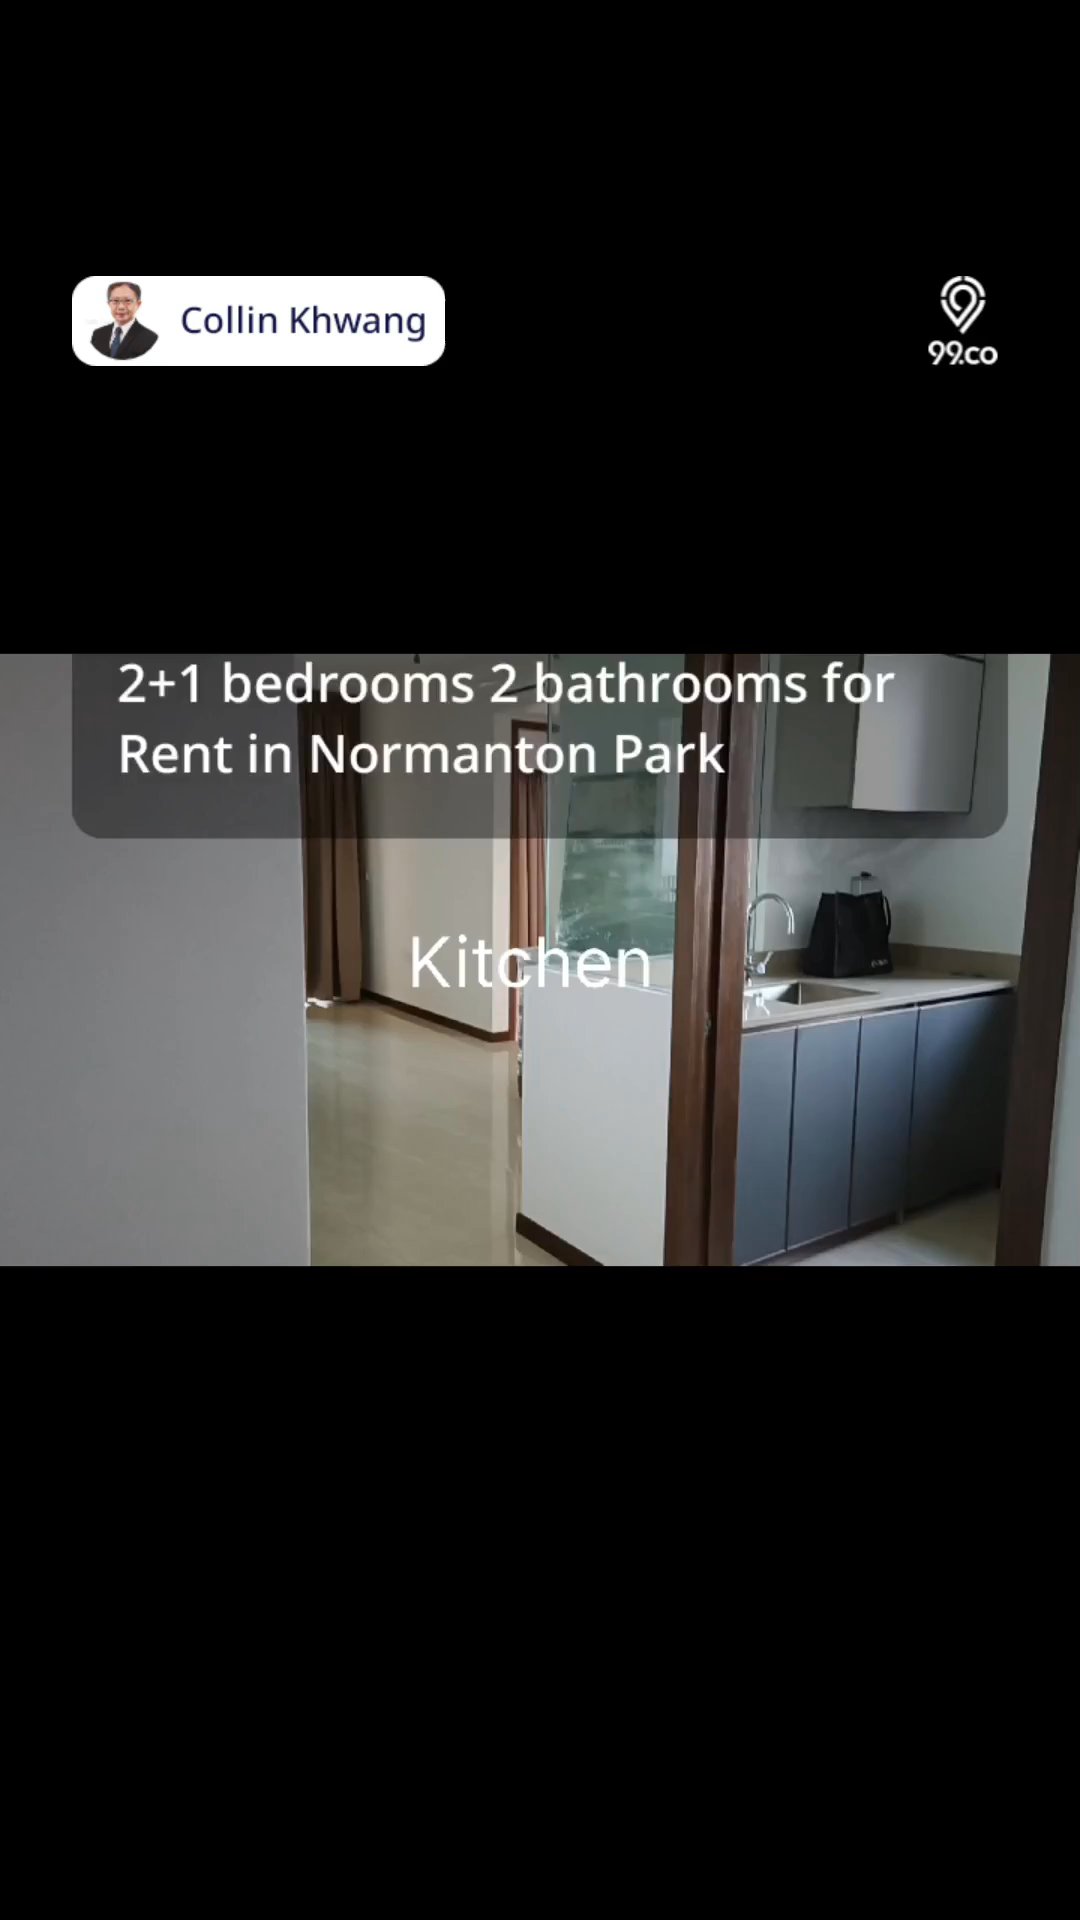 undefined of 829 sqft Condo for Rent in Normanton Park